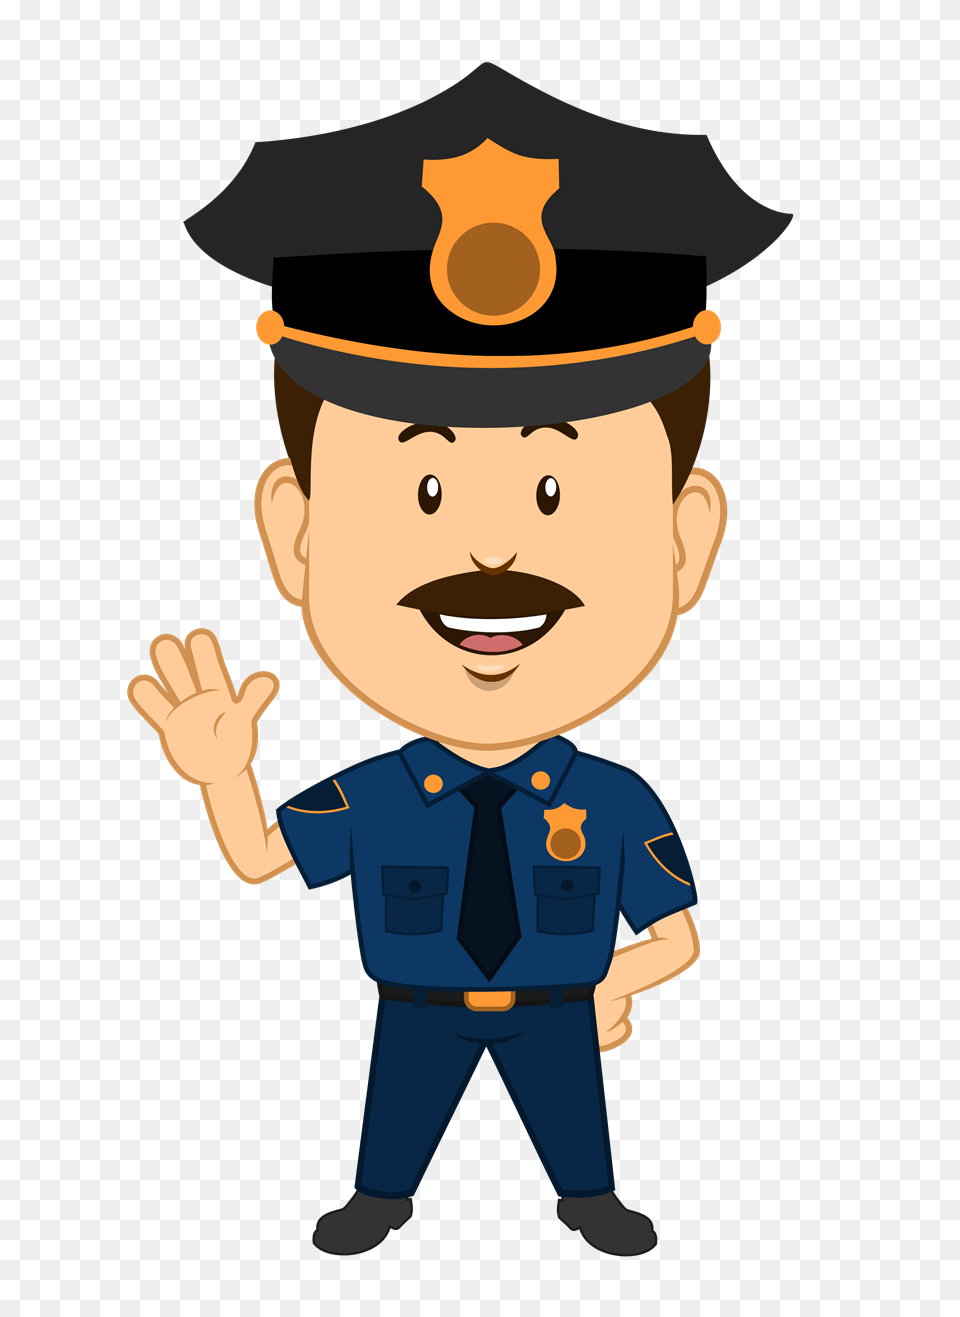 Result For Police Officer Images Clip Art Kids, Baby, Person, Face, Head Png Image